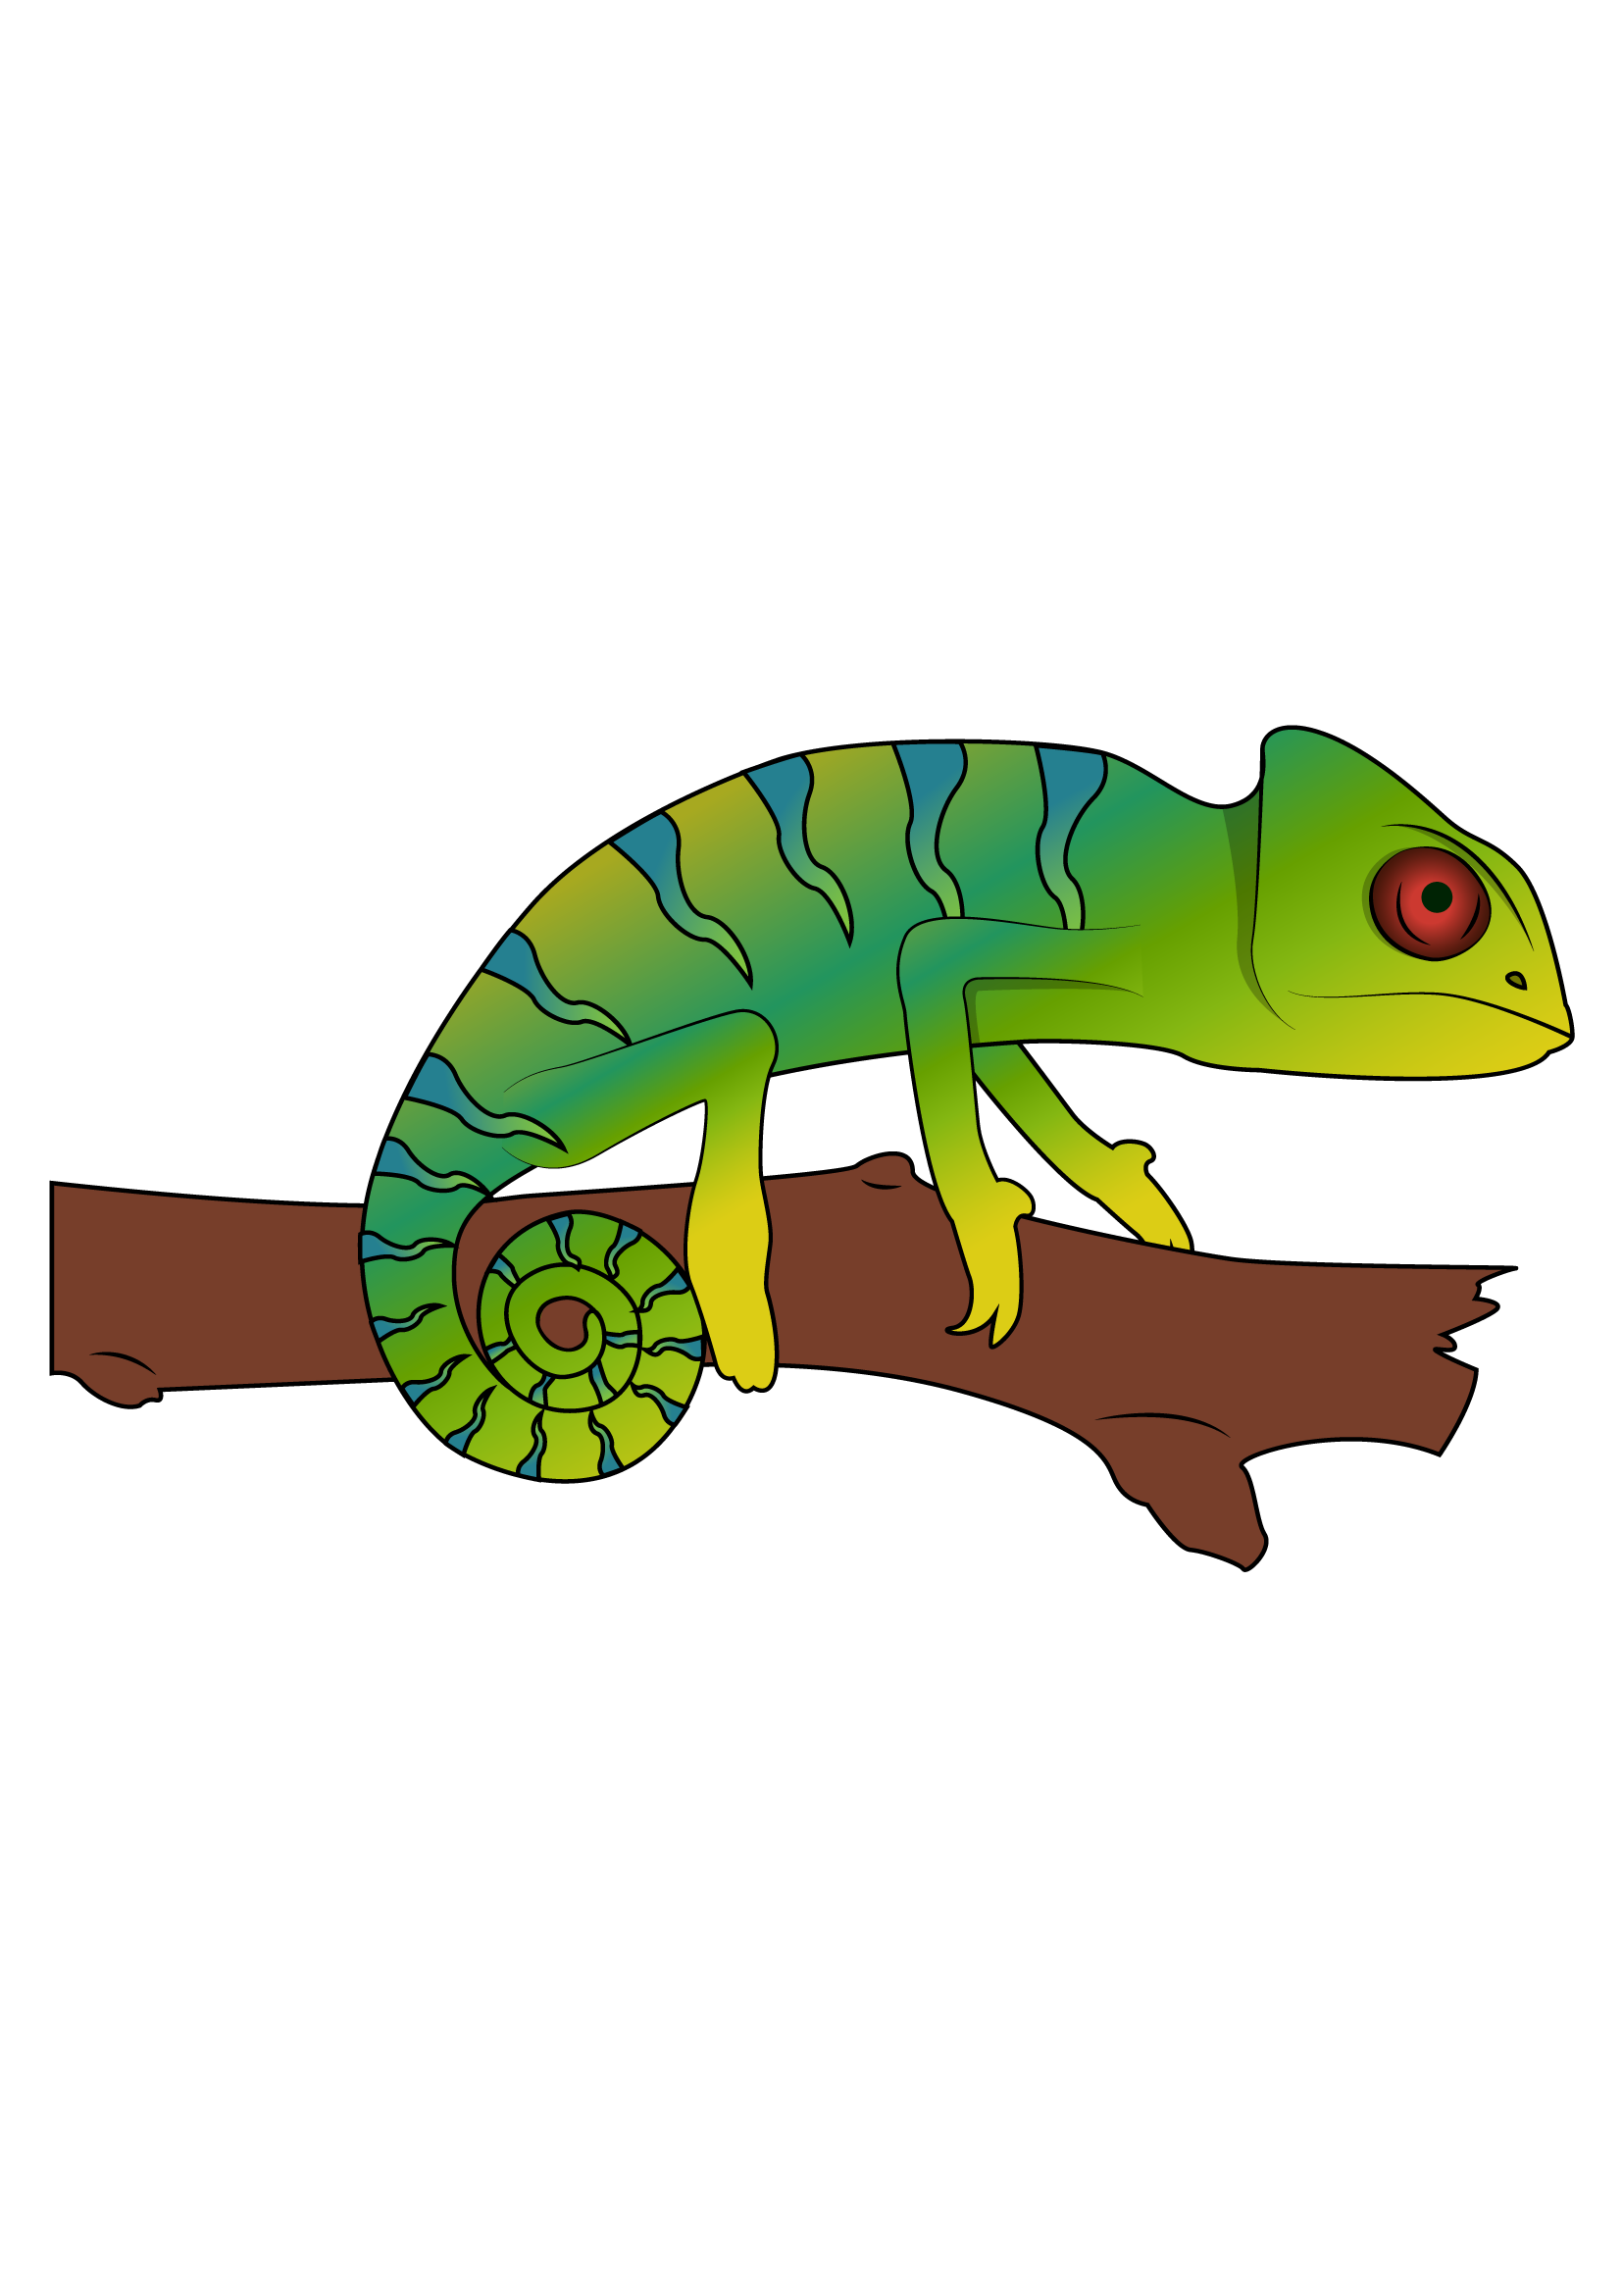 How to Draw A Chameleon Step by Step Printable